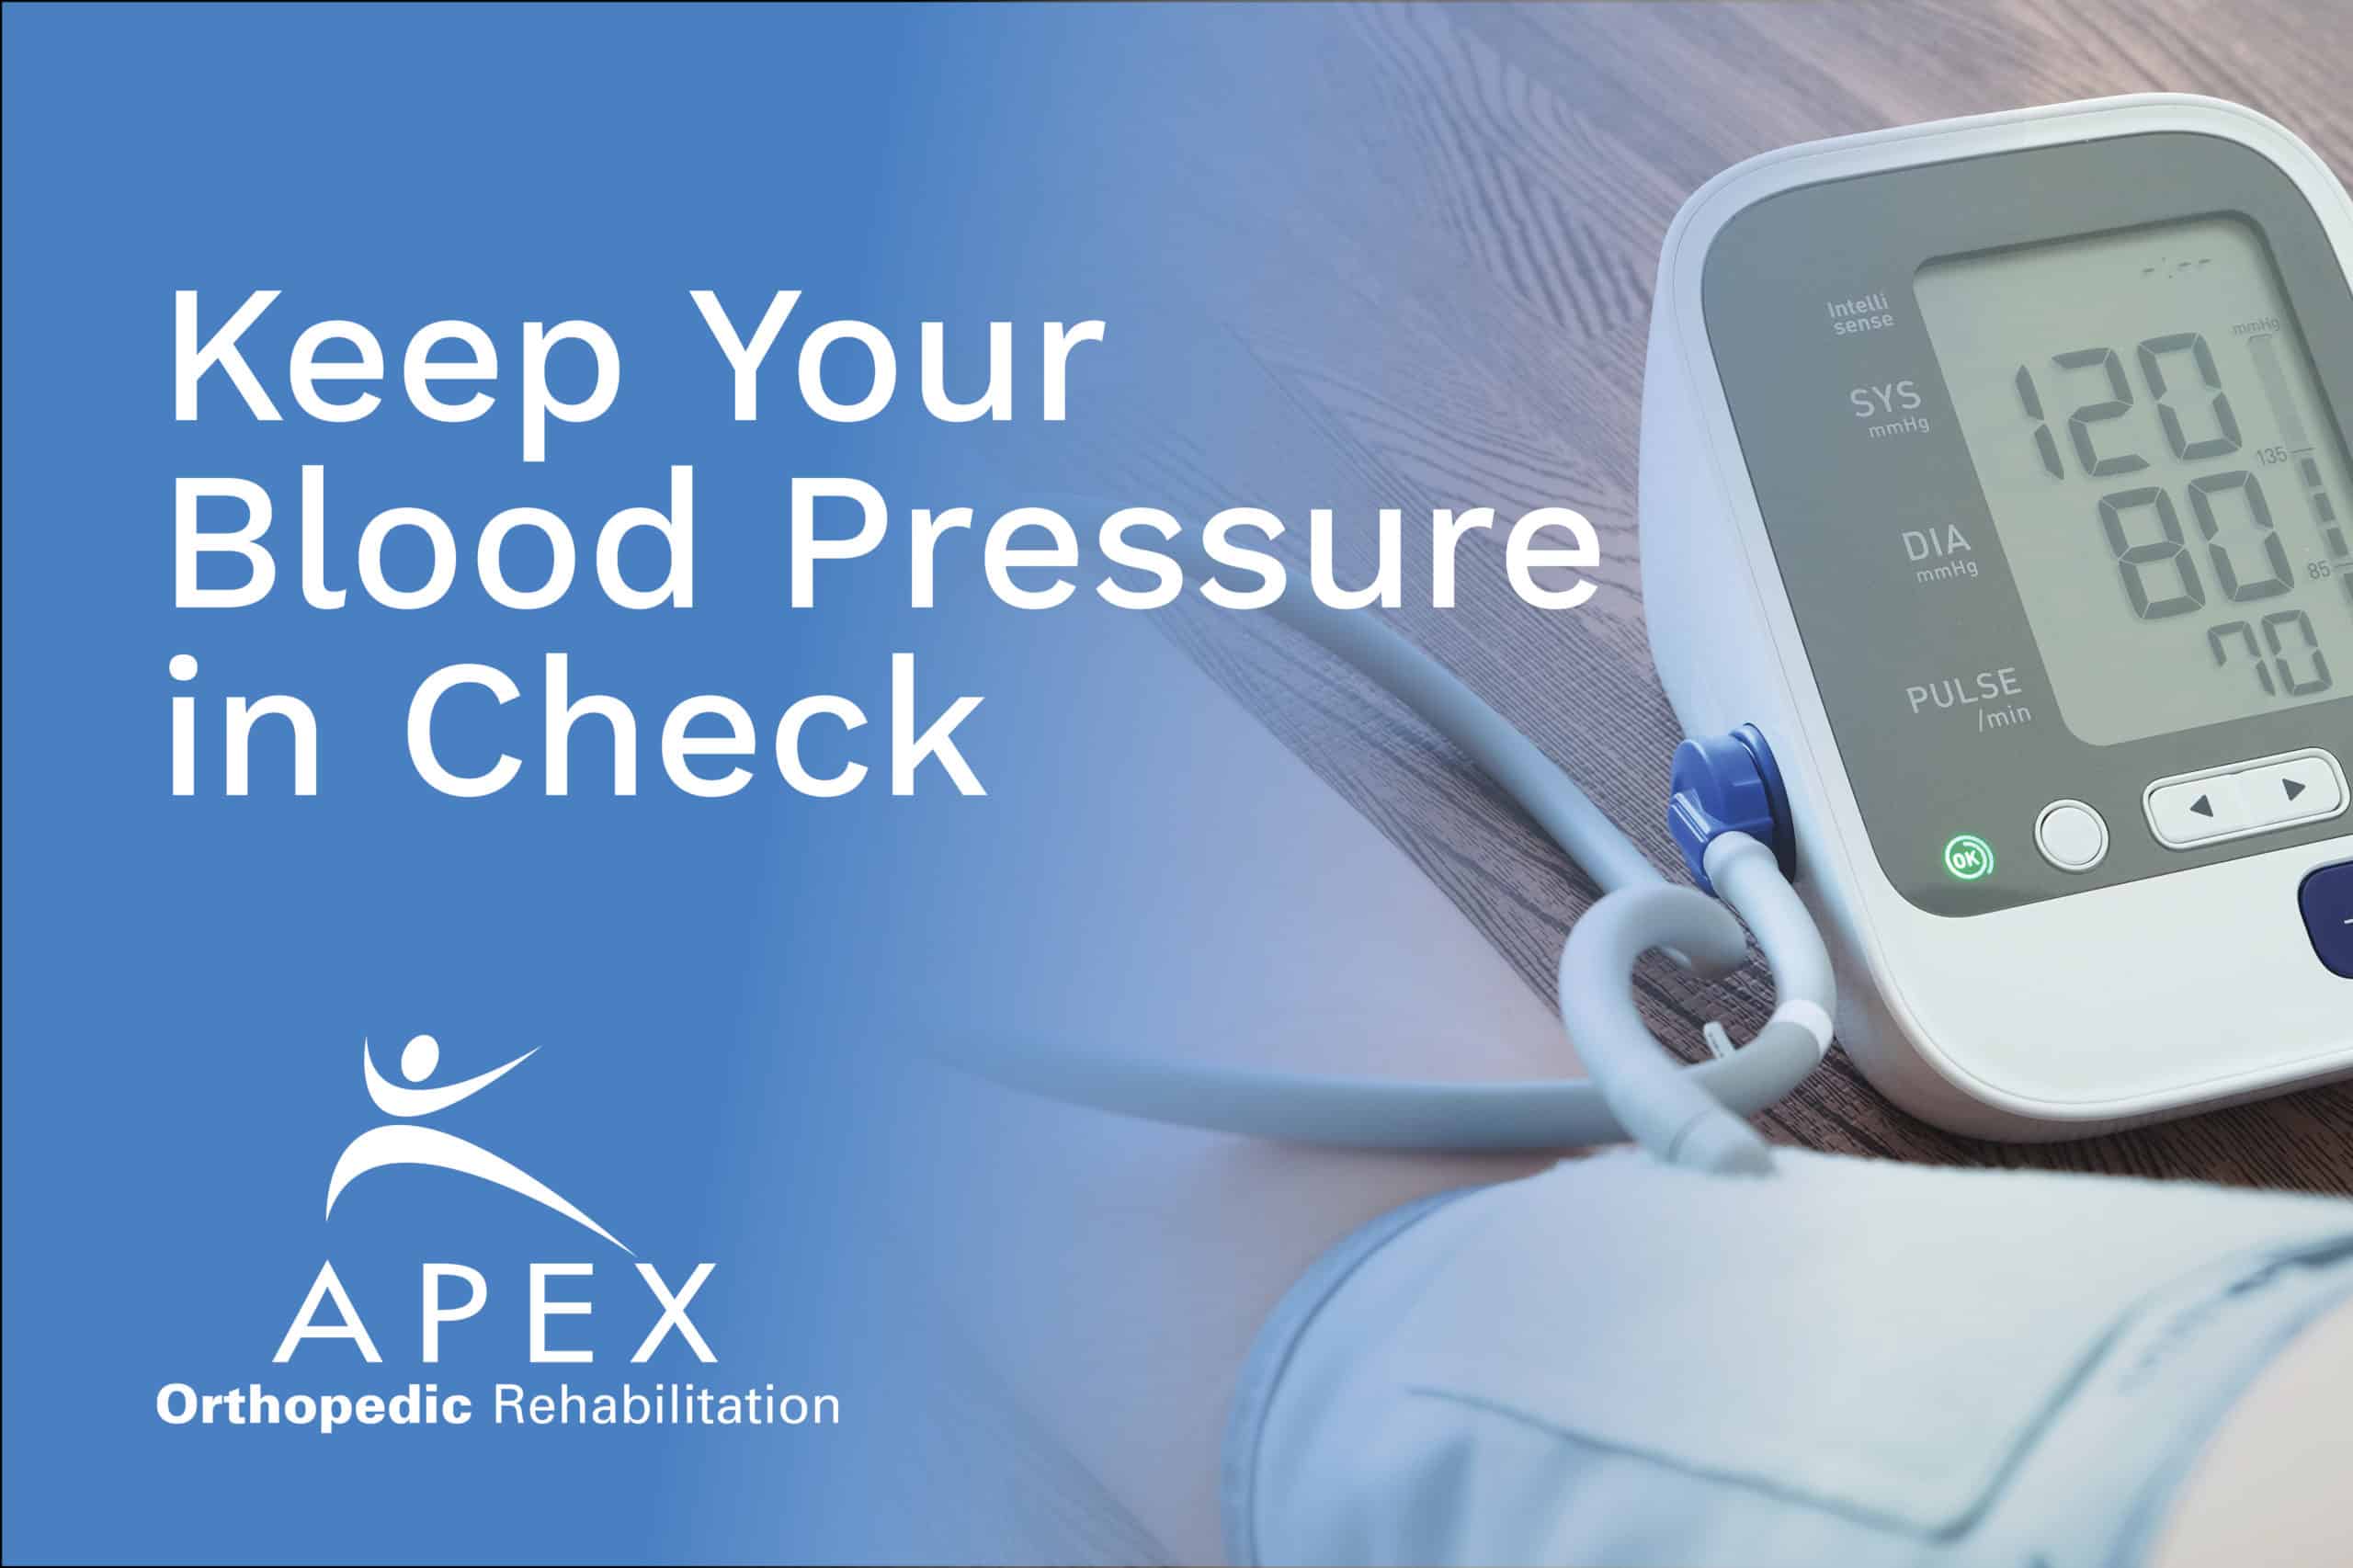 Keep Your Blood Pressure in Check